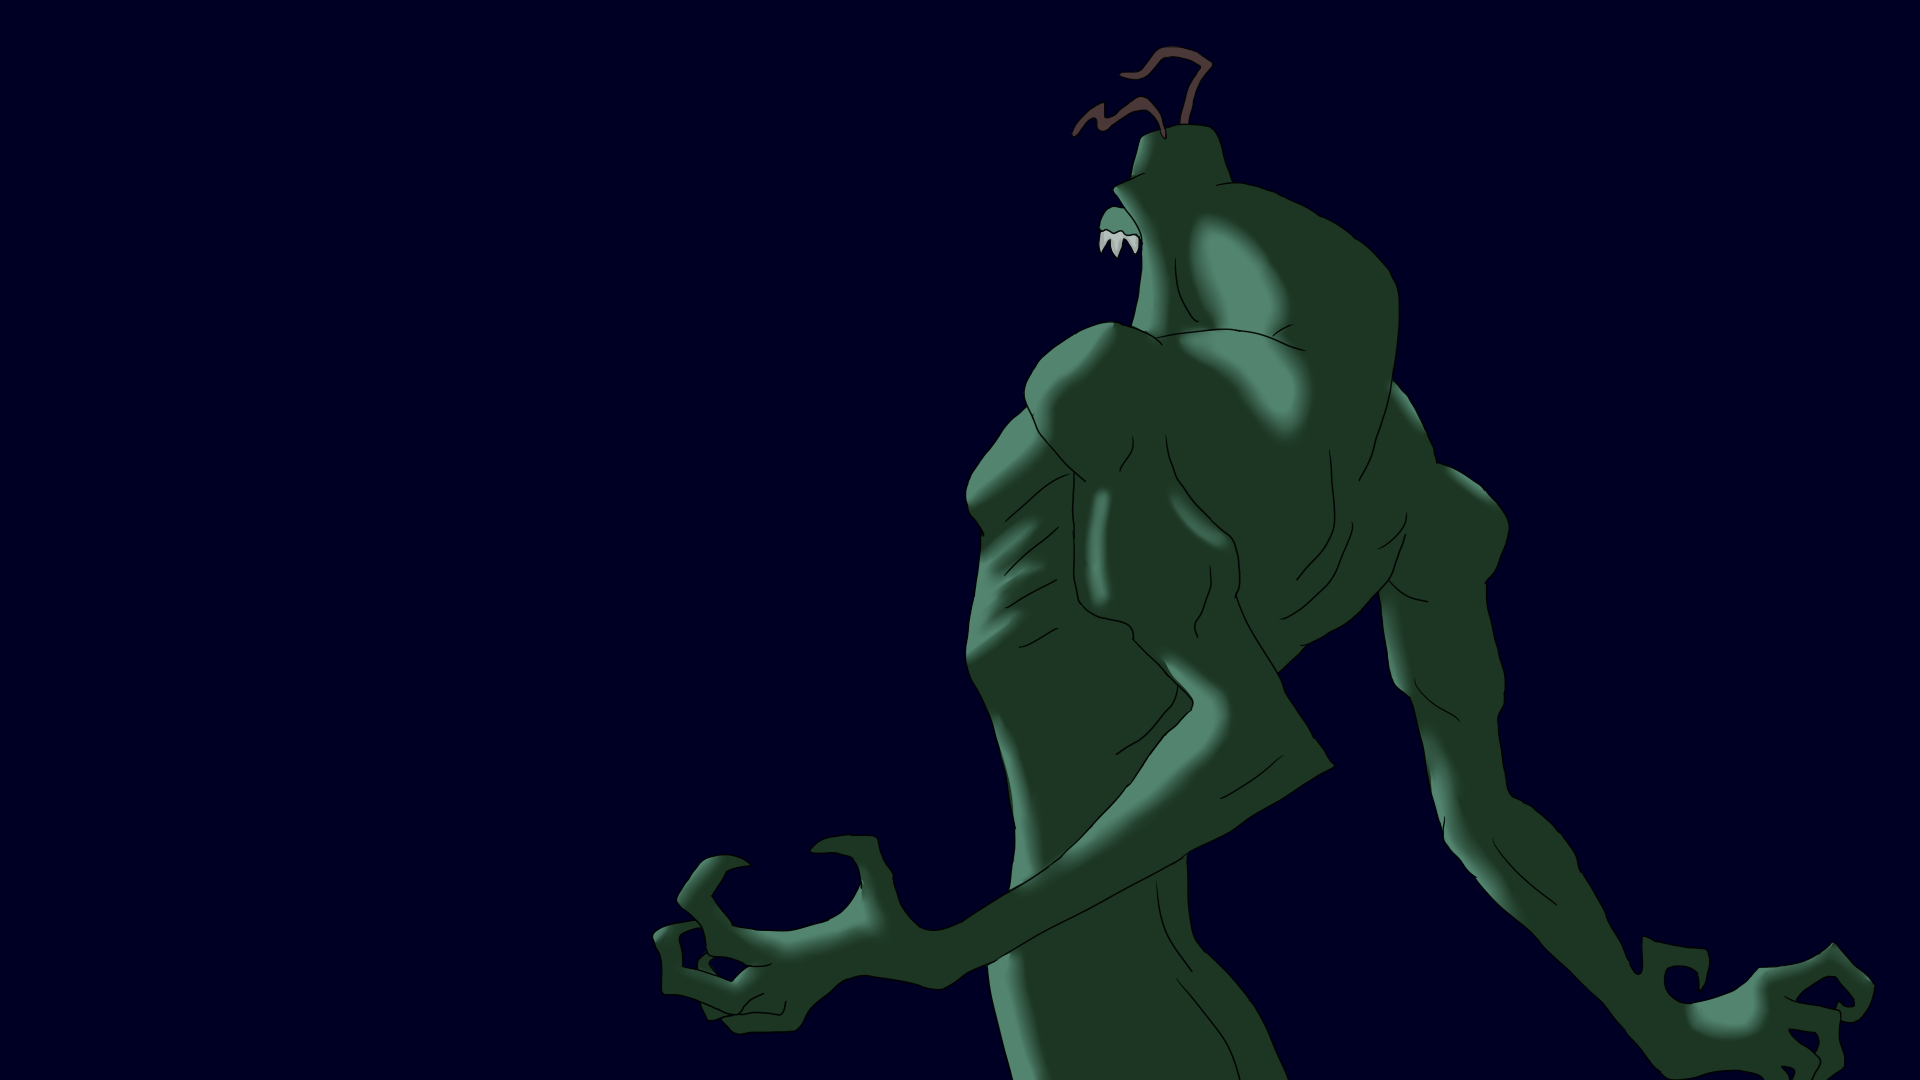 Based on screenshot from the movie Space Jam.

Traced and colored in Paint Tool SAI. 
